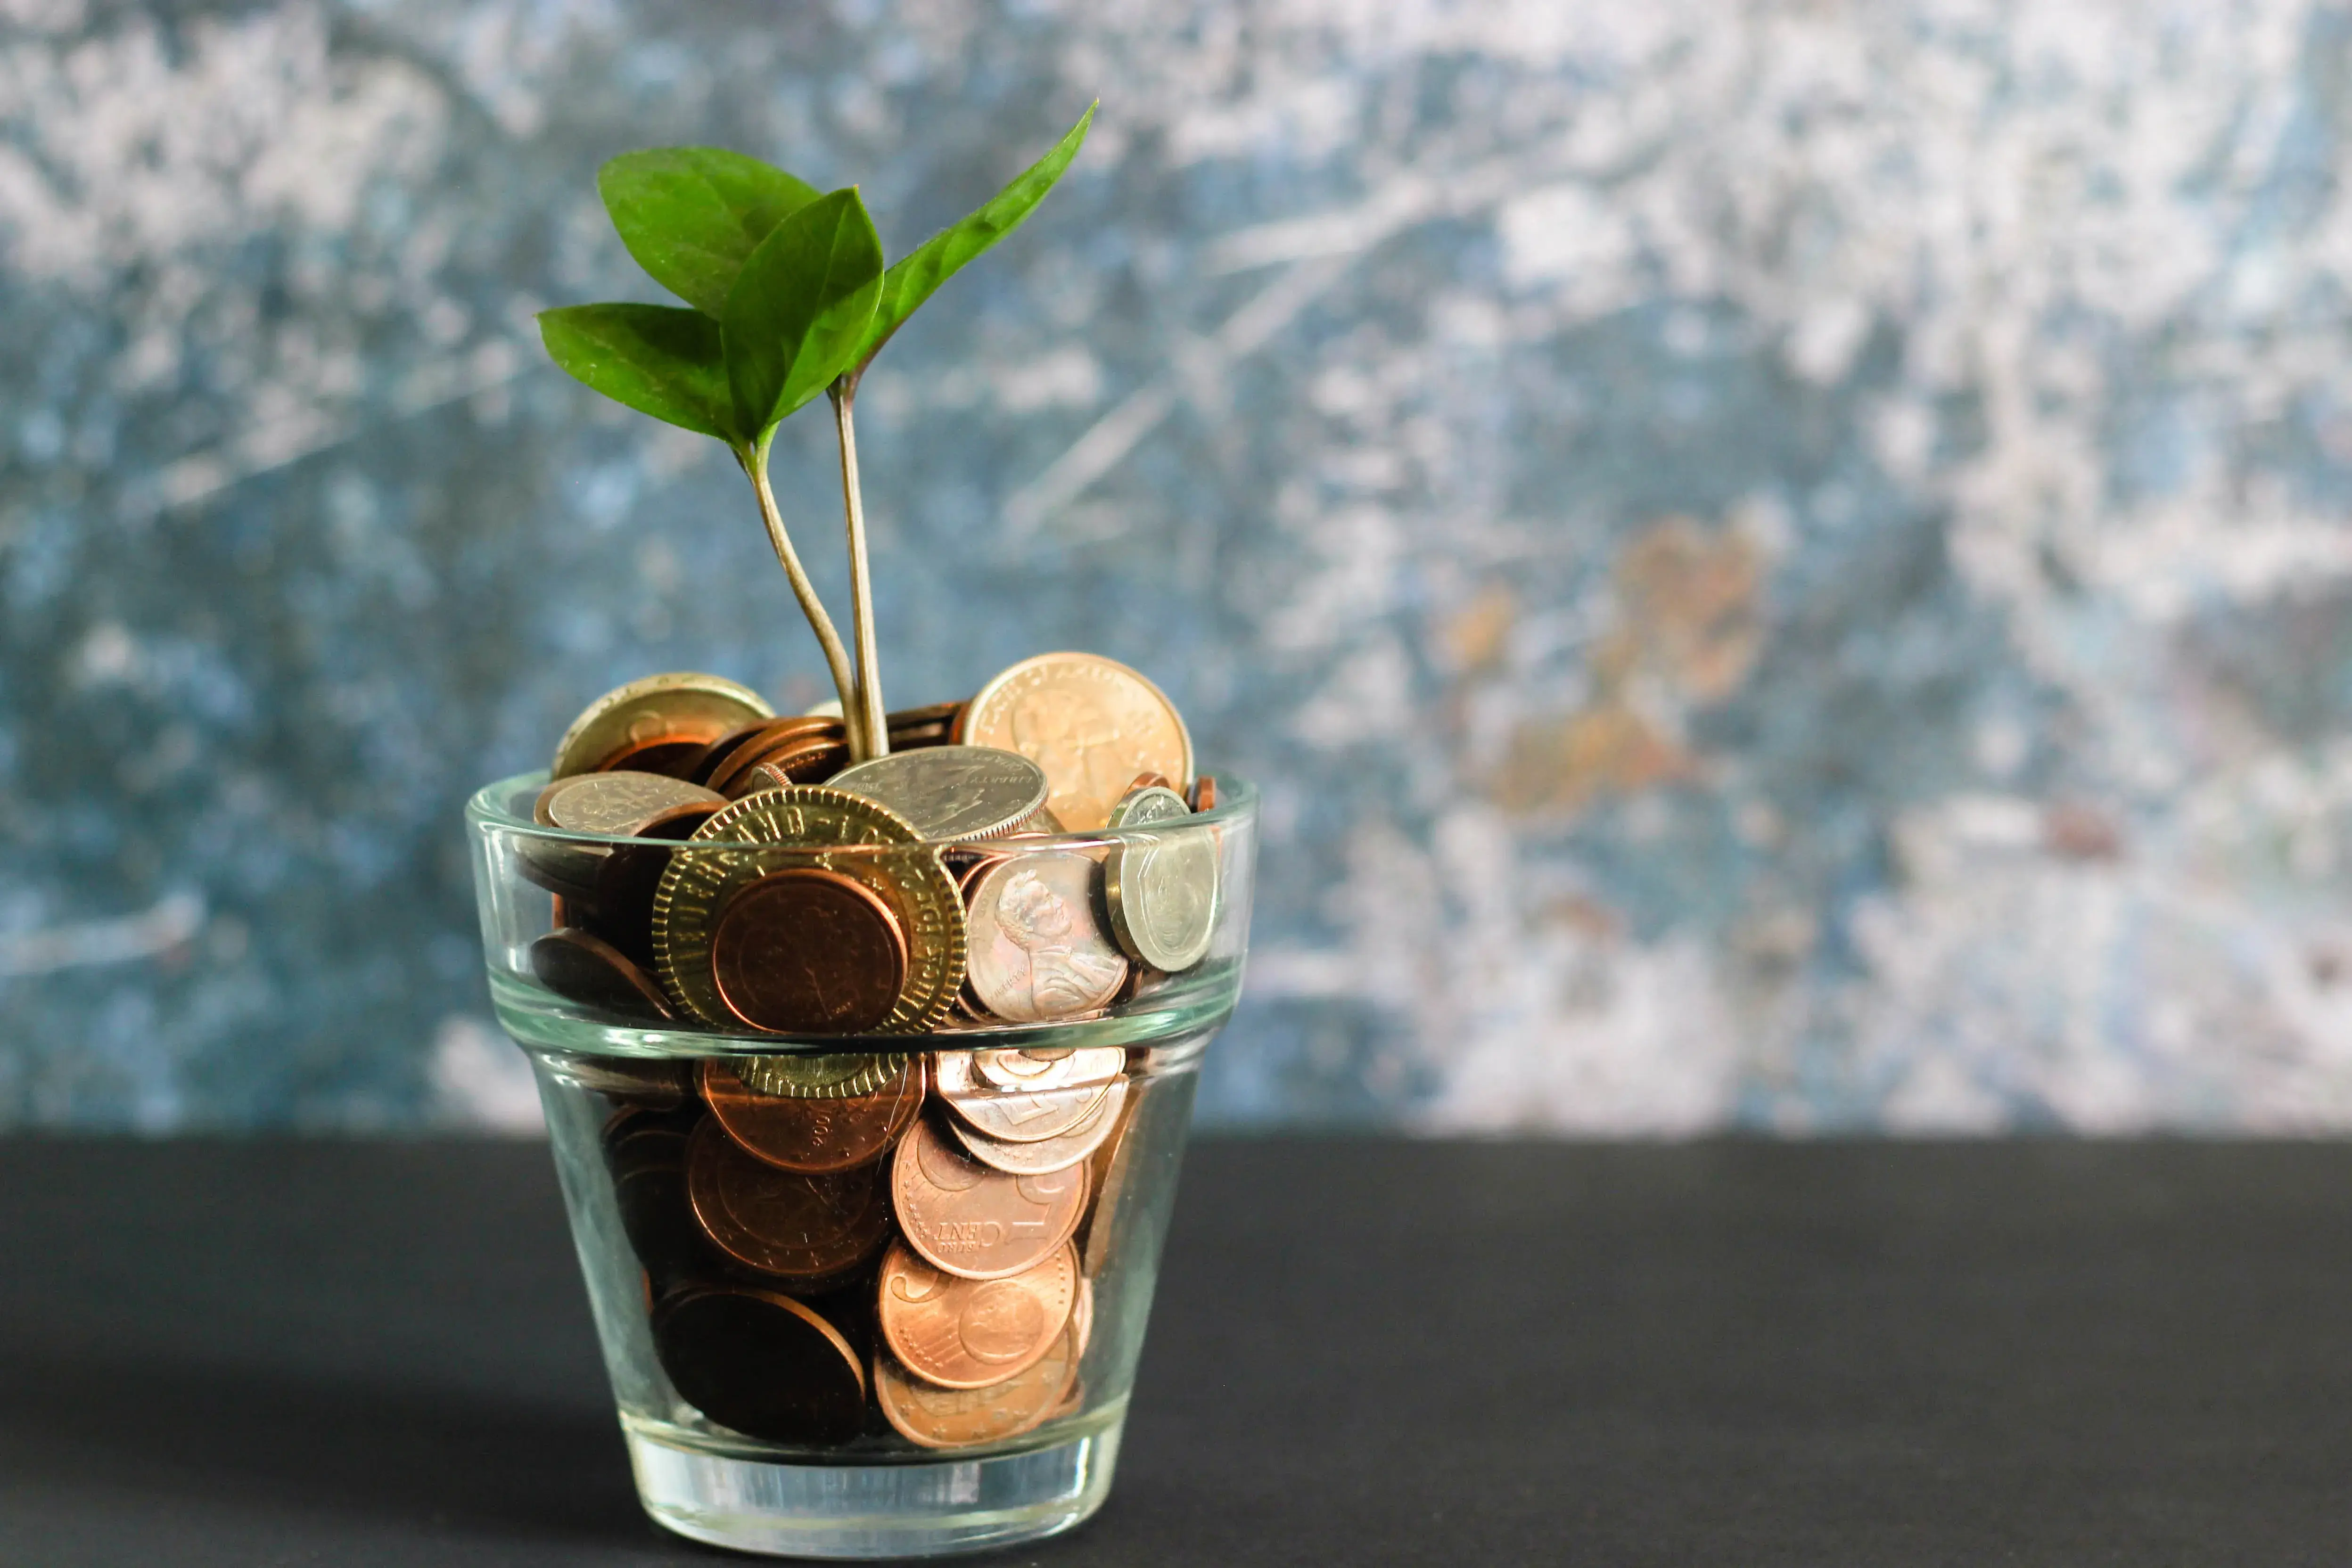 A plant grows in a flower pot full of coins. I guess it's a visual metaphor about growing your money.